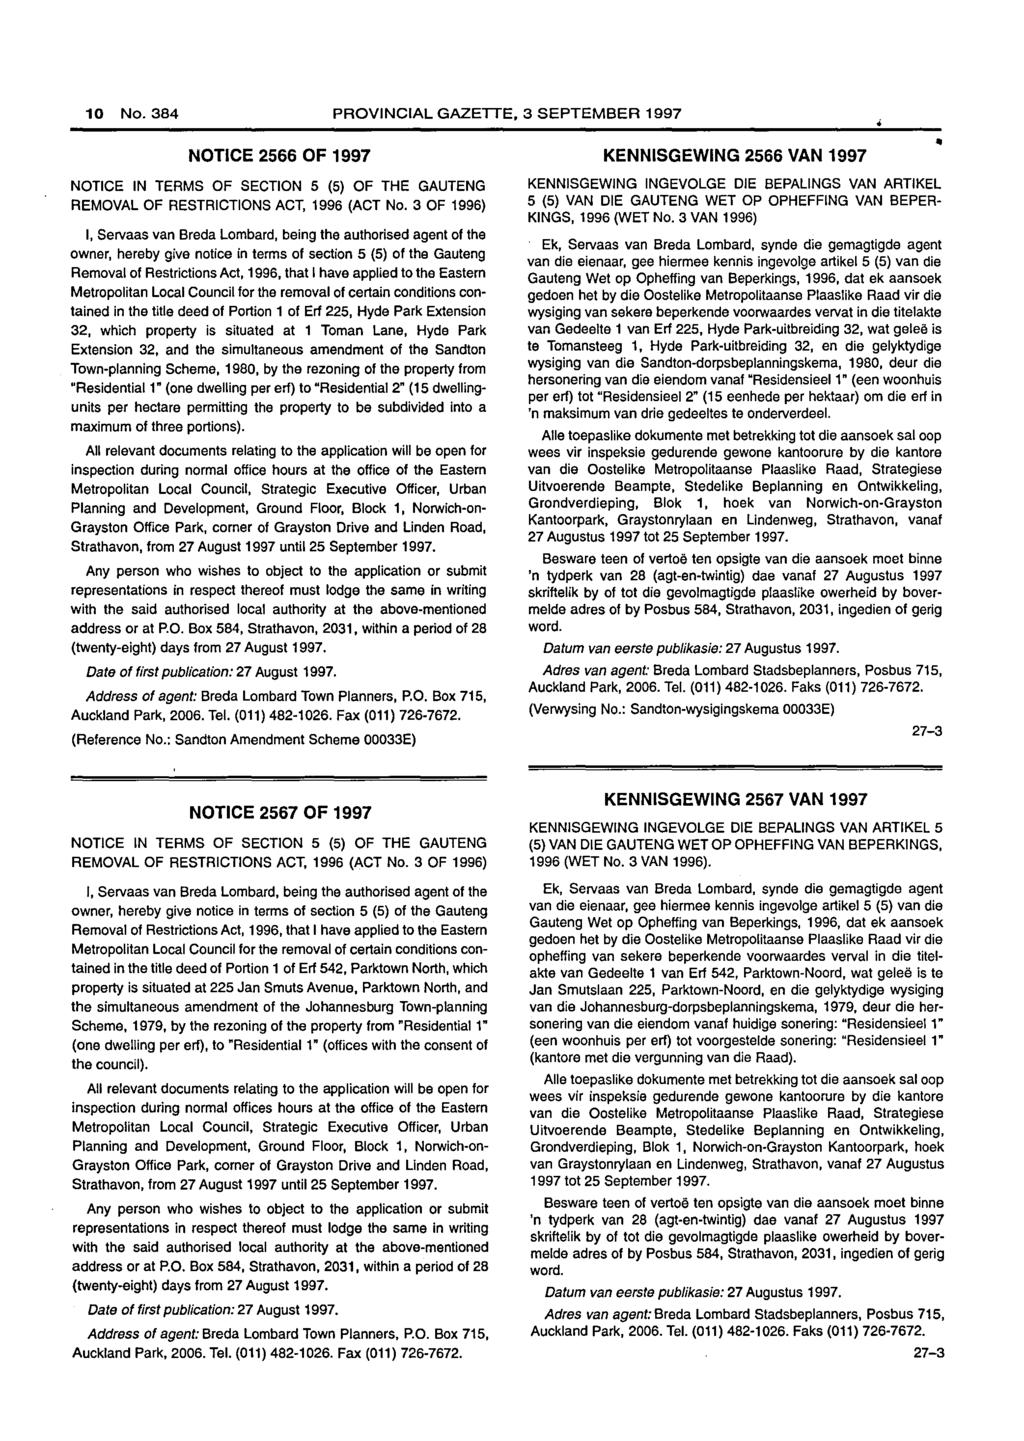 10 No. PROVINCIAL GAZETTE, 3 SEPTEMBER 1997 NOTICE 2566 OF 1997 NOTICE IN TERMS OF SECTION 5 (5) OF THE GAUTENG REMOVAL OF RESTRICTIONS ACT, 1996 (ACT No.